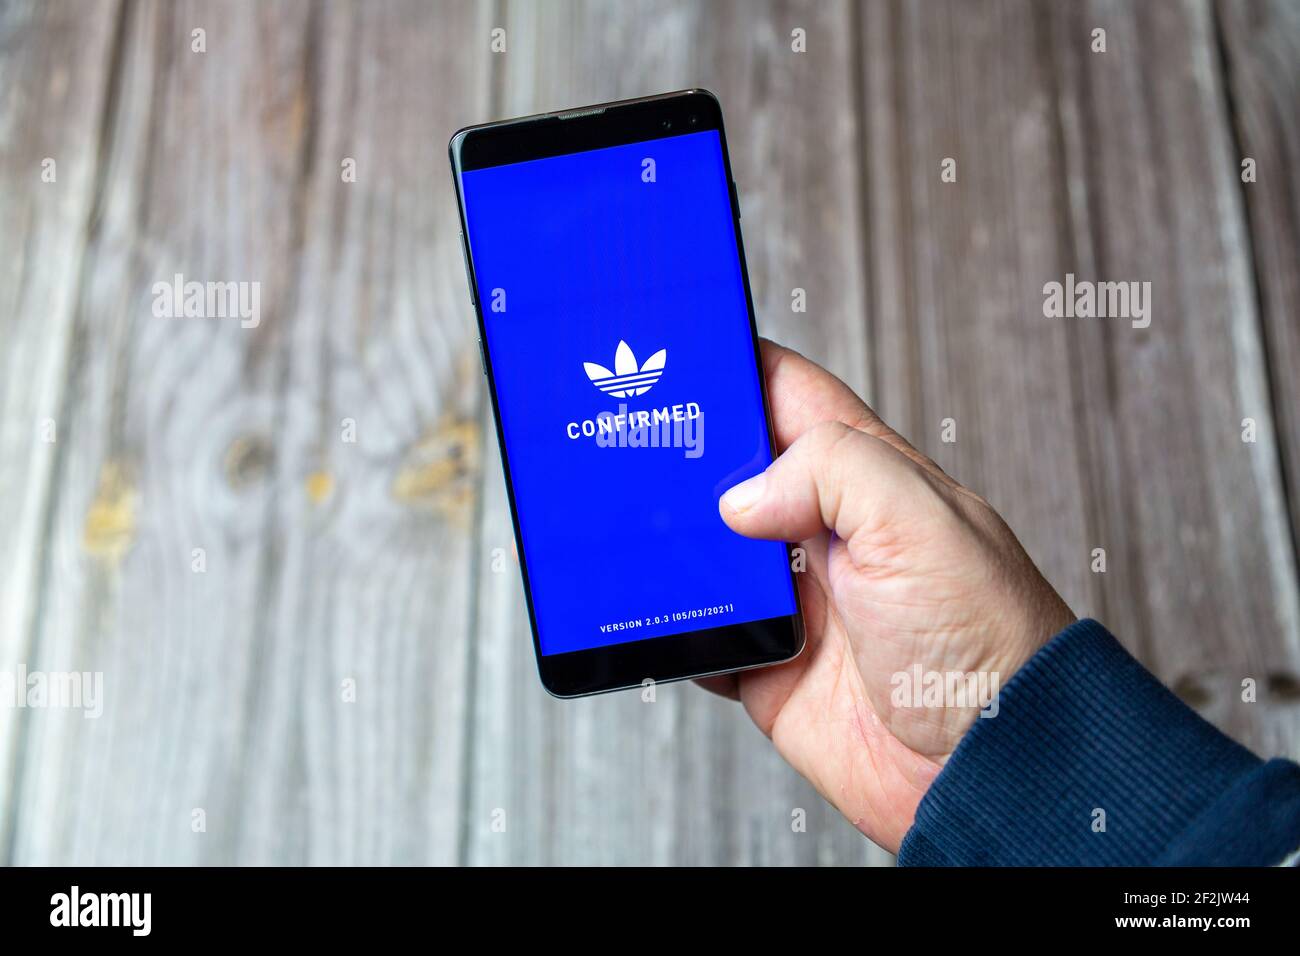 A Mobile phone or cell phone being held in a hand with the Adidas Confirmed app open on screen Stock Photo